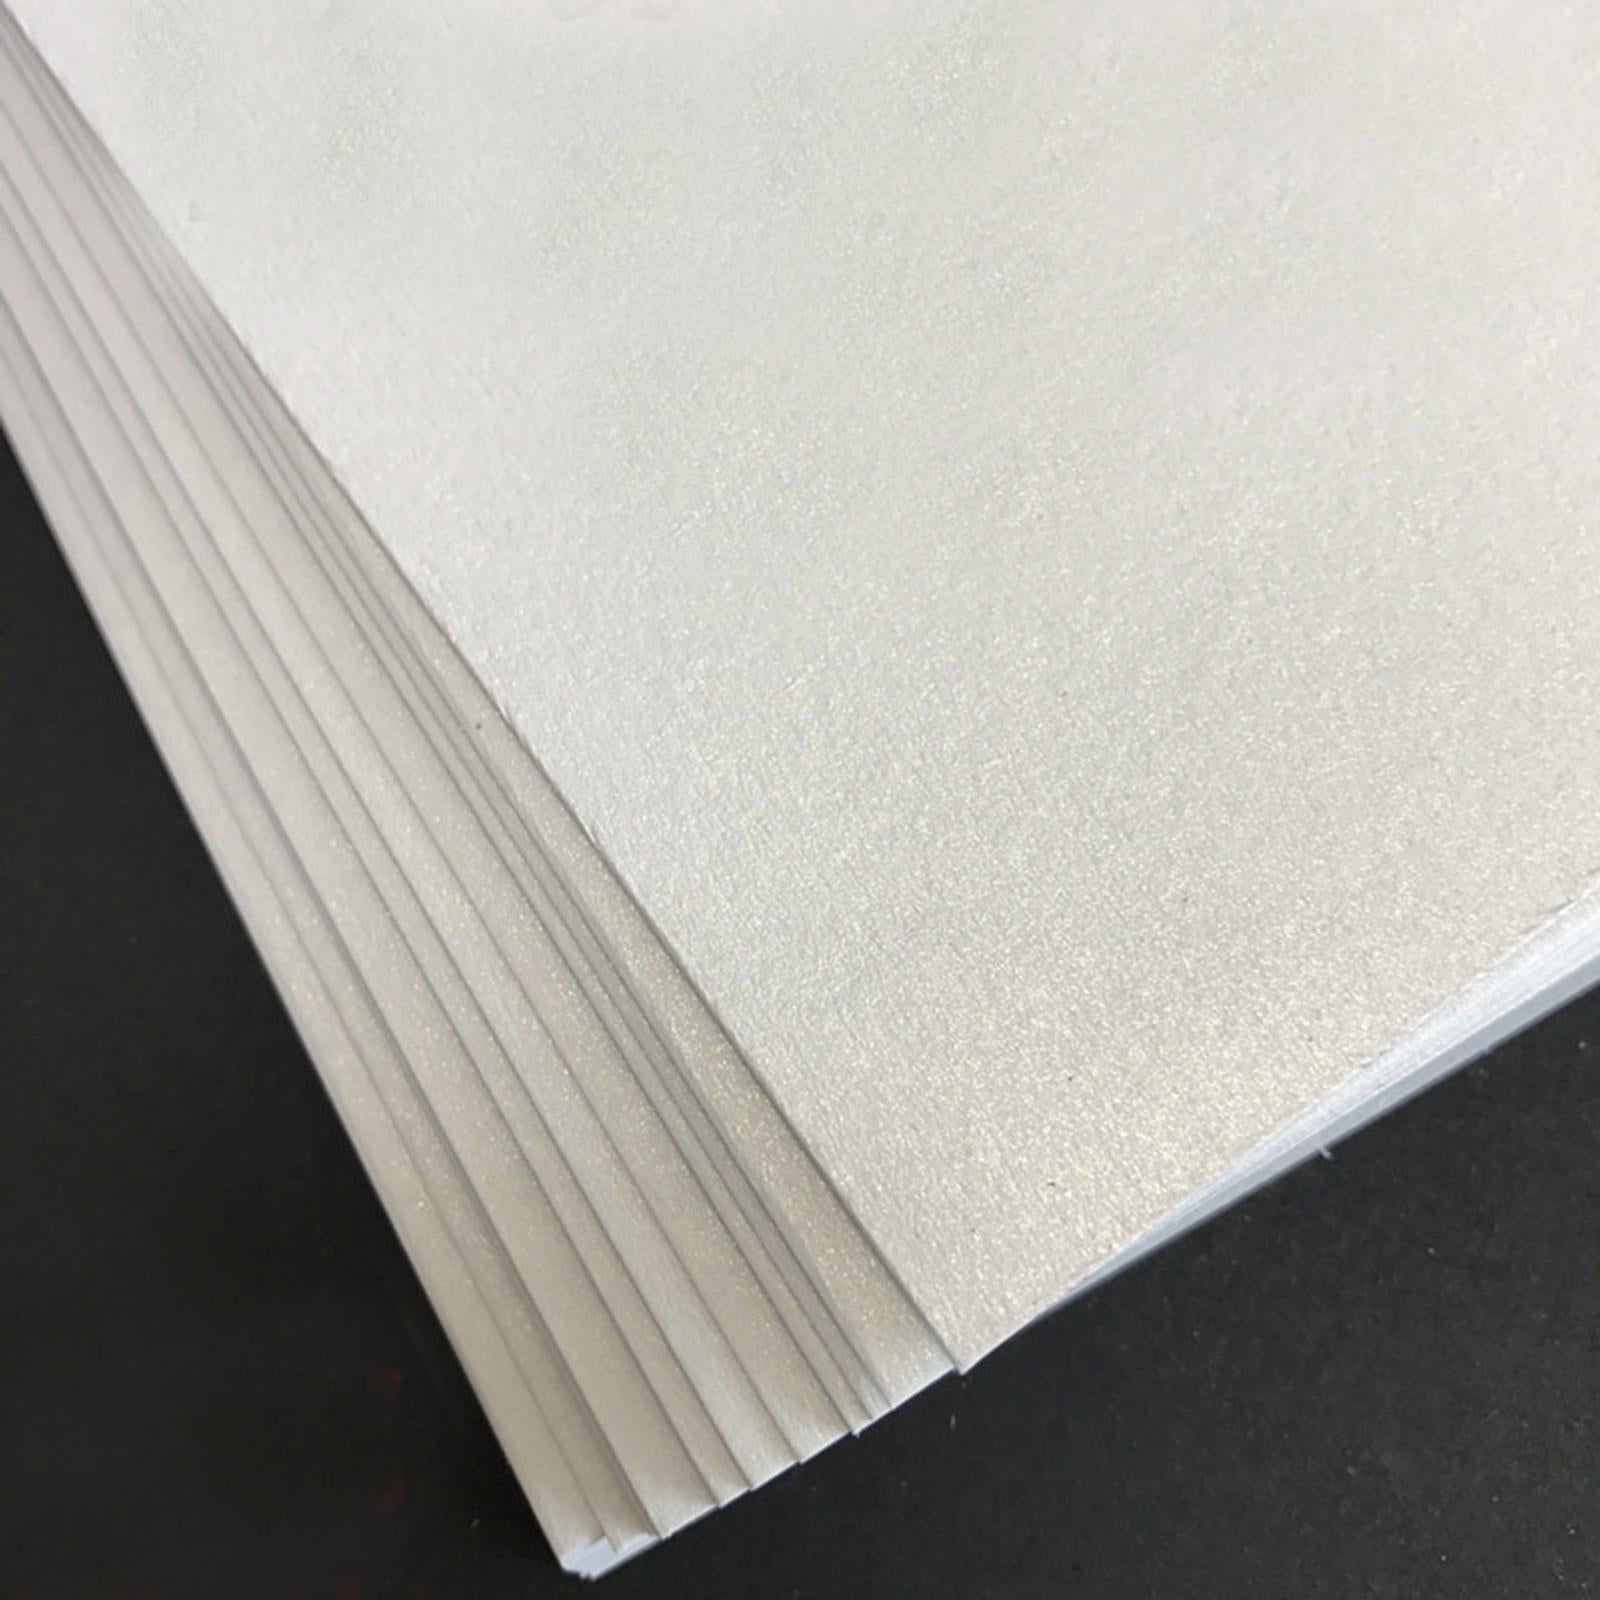 50 Sheets Pearlescent Shimmer A4 Double Sided Paper for Cardmaking & Crafts